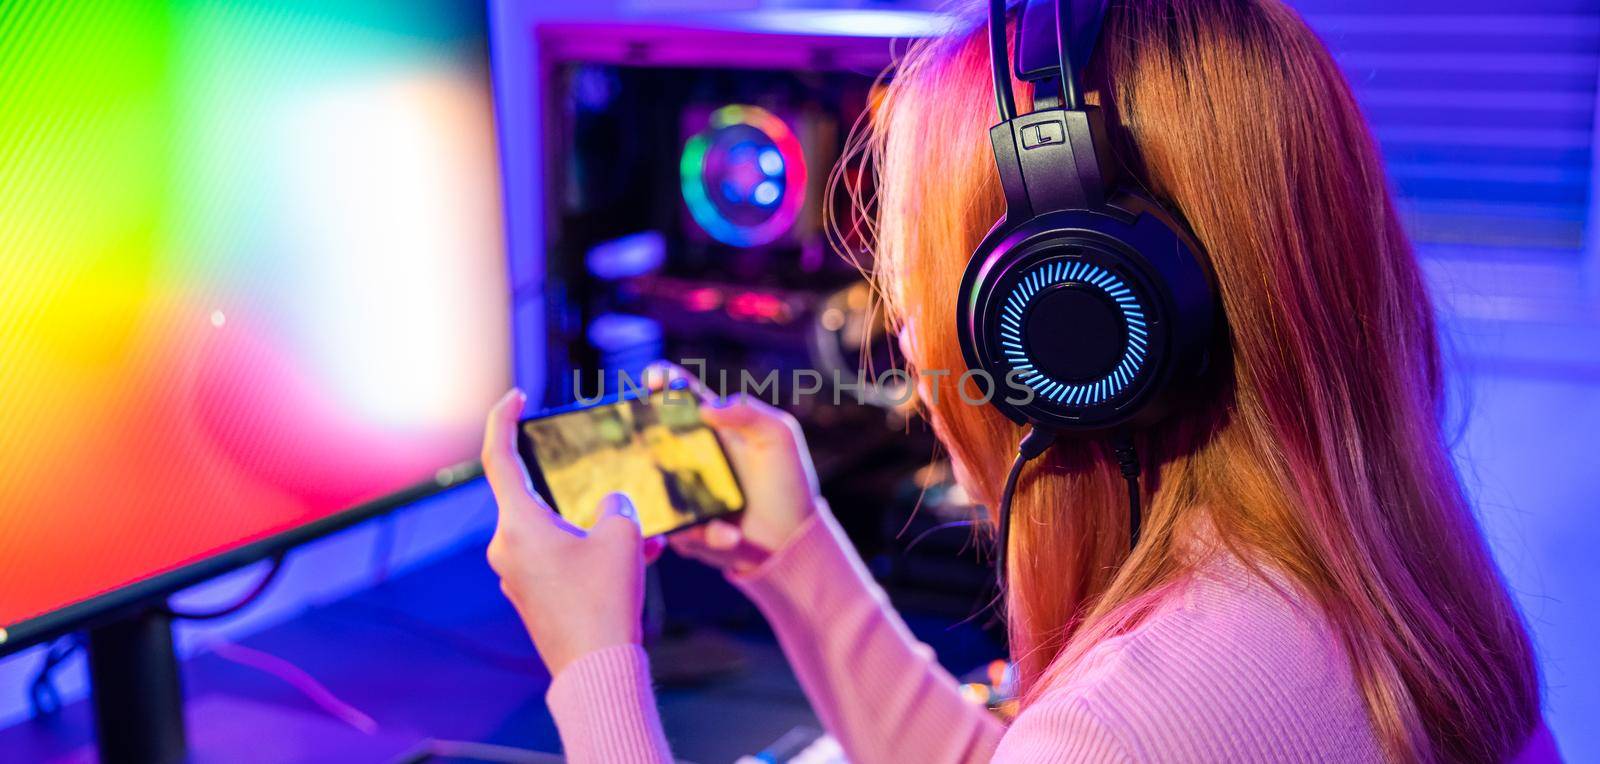 Asian woman live stream she play video game via smartphone at home neon lights living room, Gamer playing online game application on mobile phone wear gaming headphones, E-Sport concept